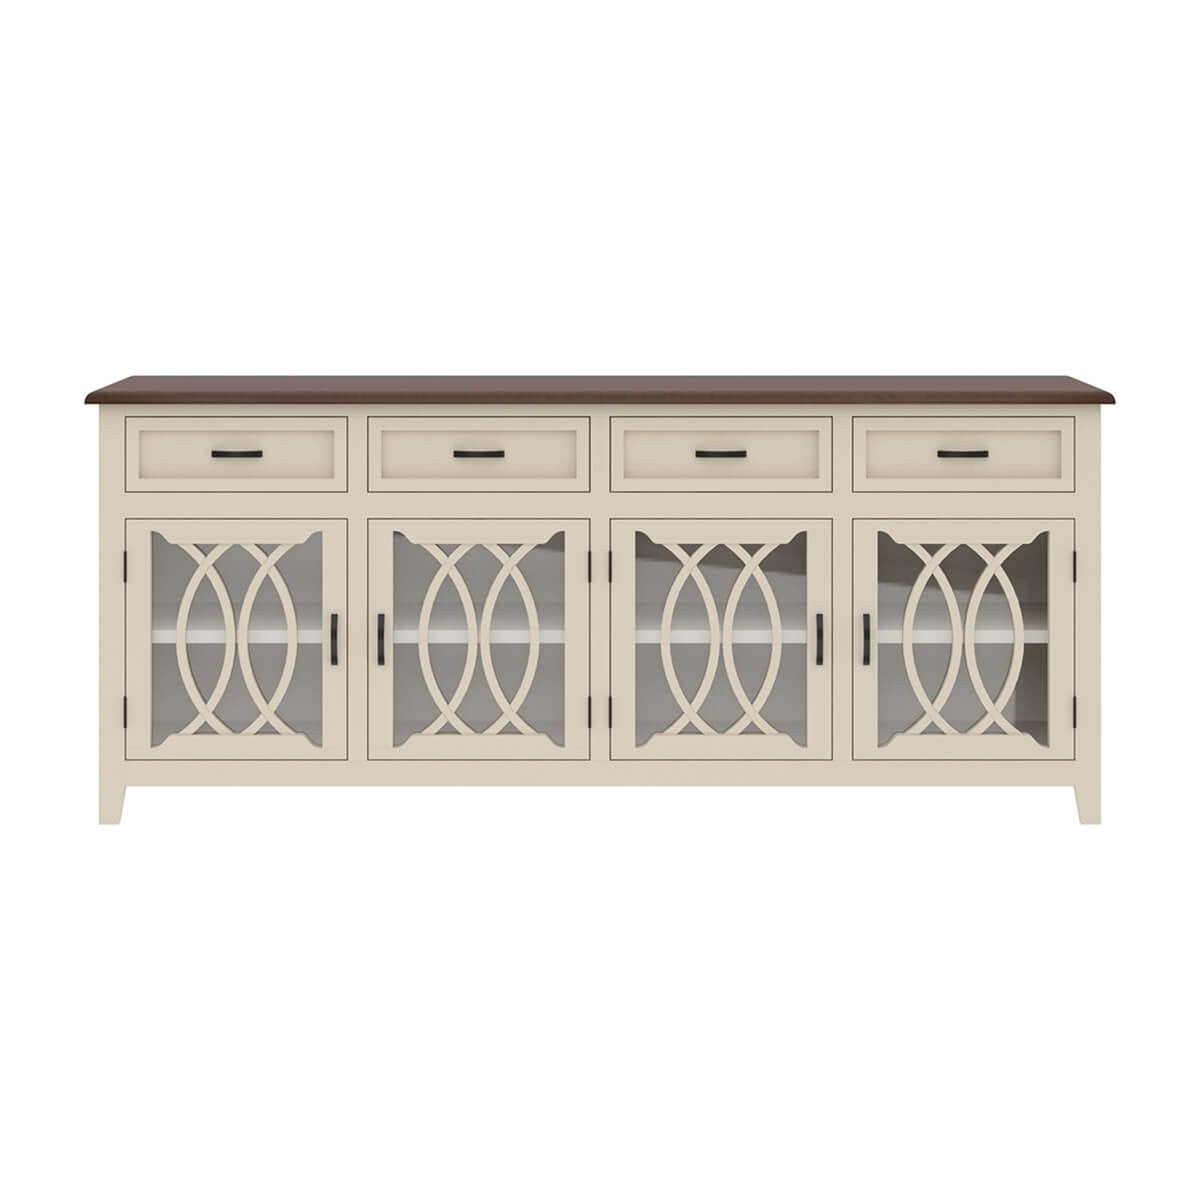 French Arched Indian Solid Wood 4 Drawers Extra Large Long Sideboard